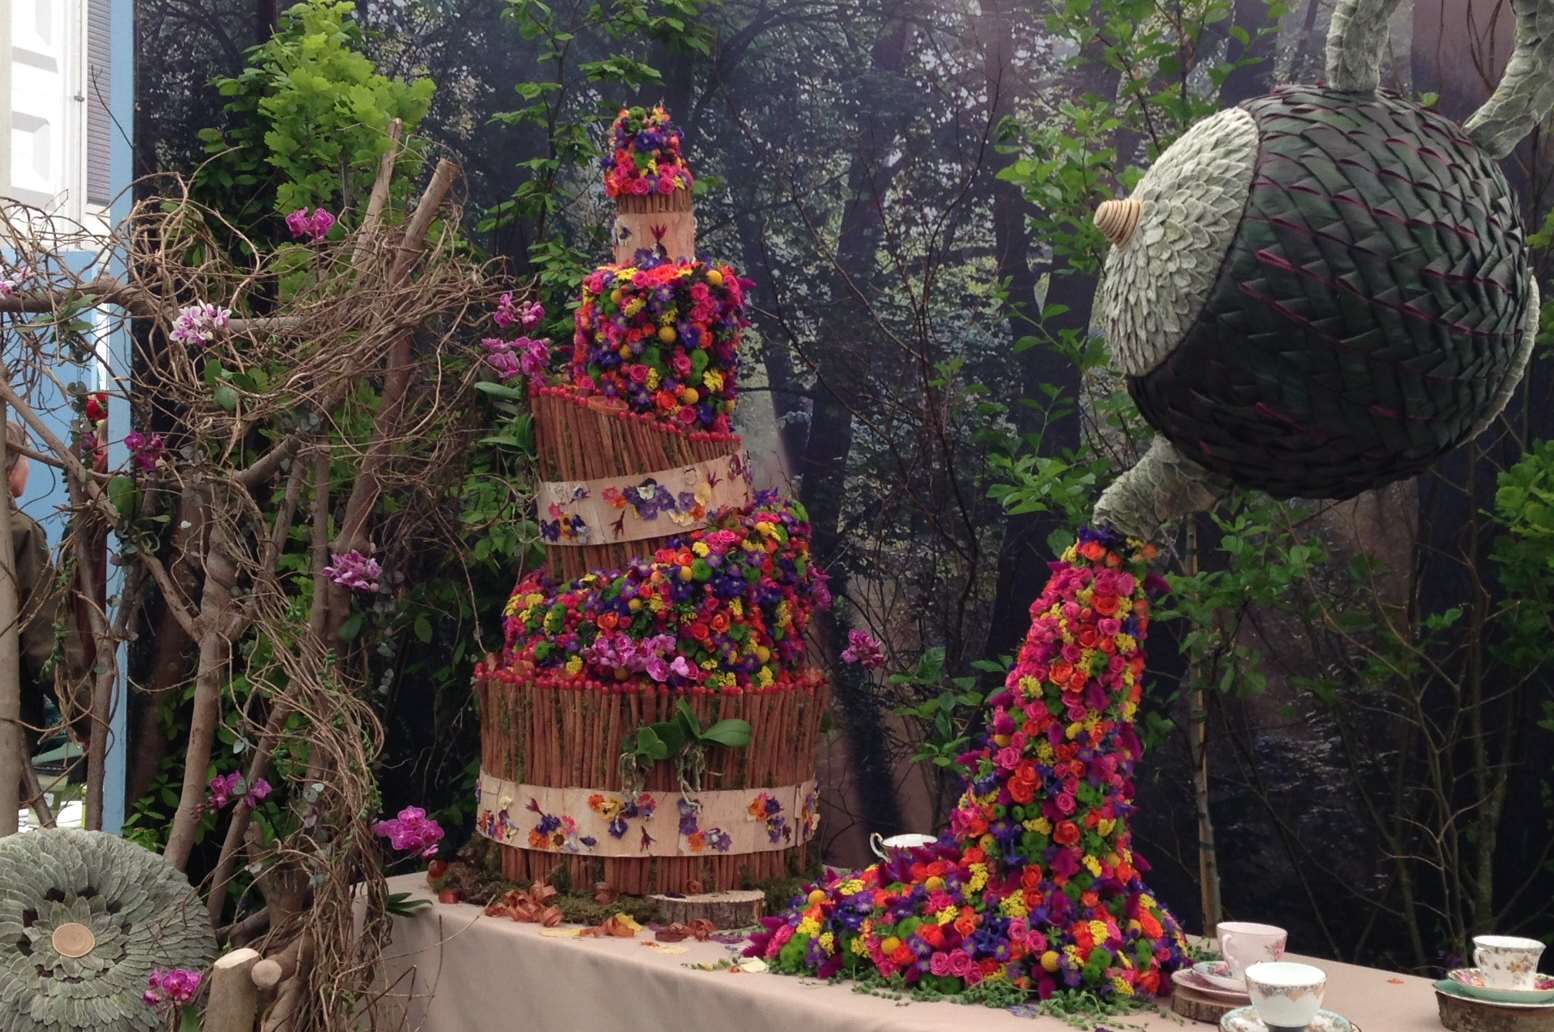 Hadlow College's display at the Chelsea Flower Show